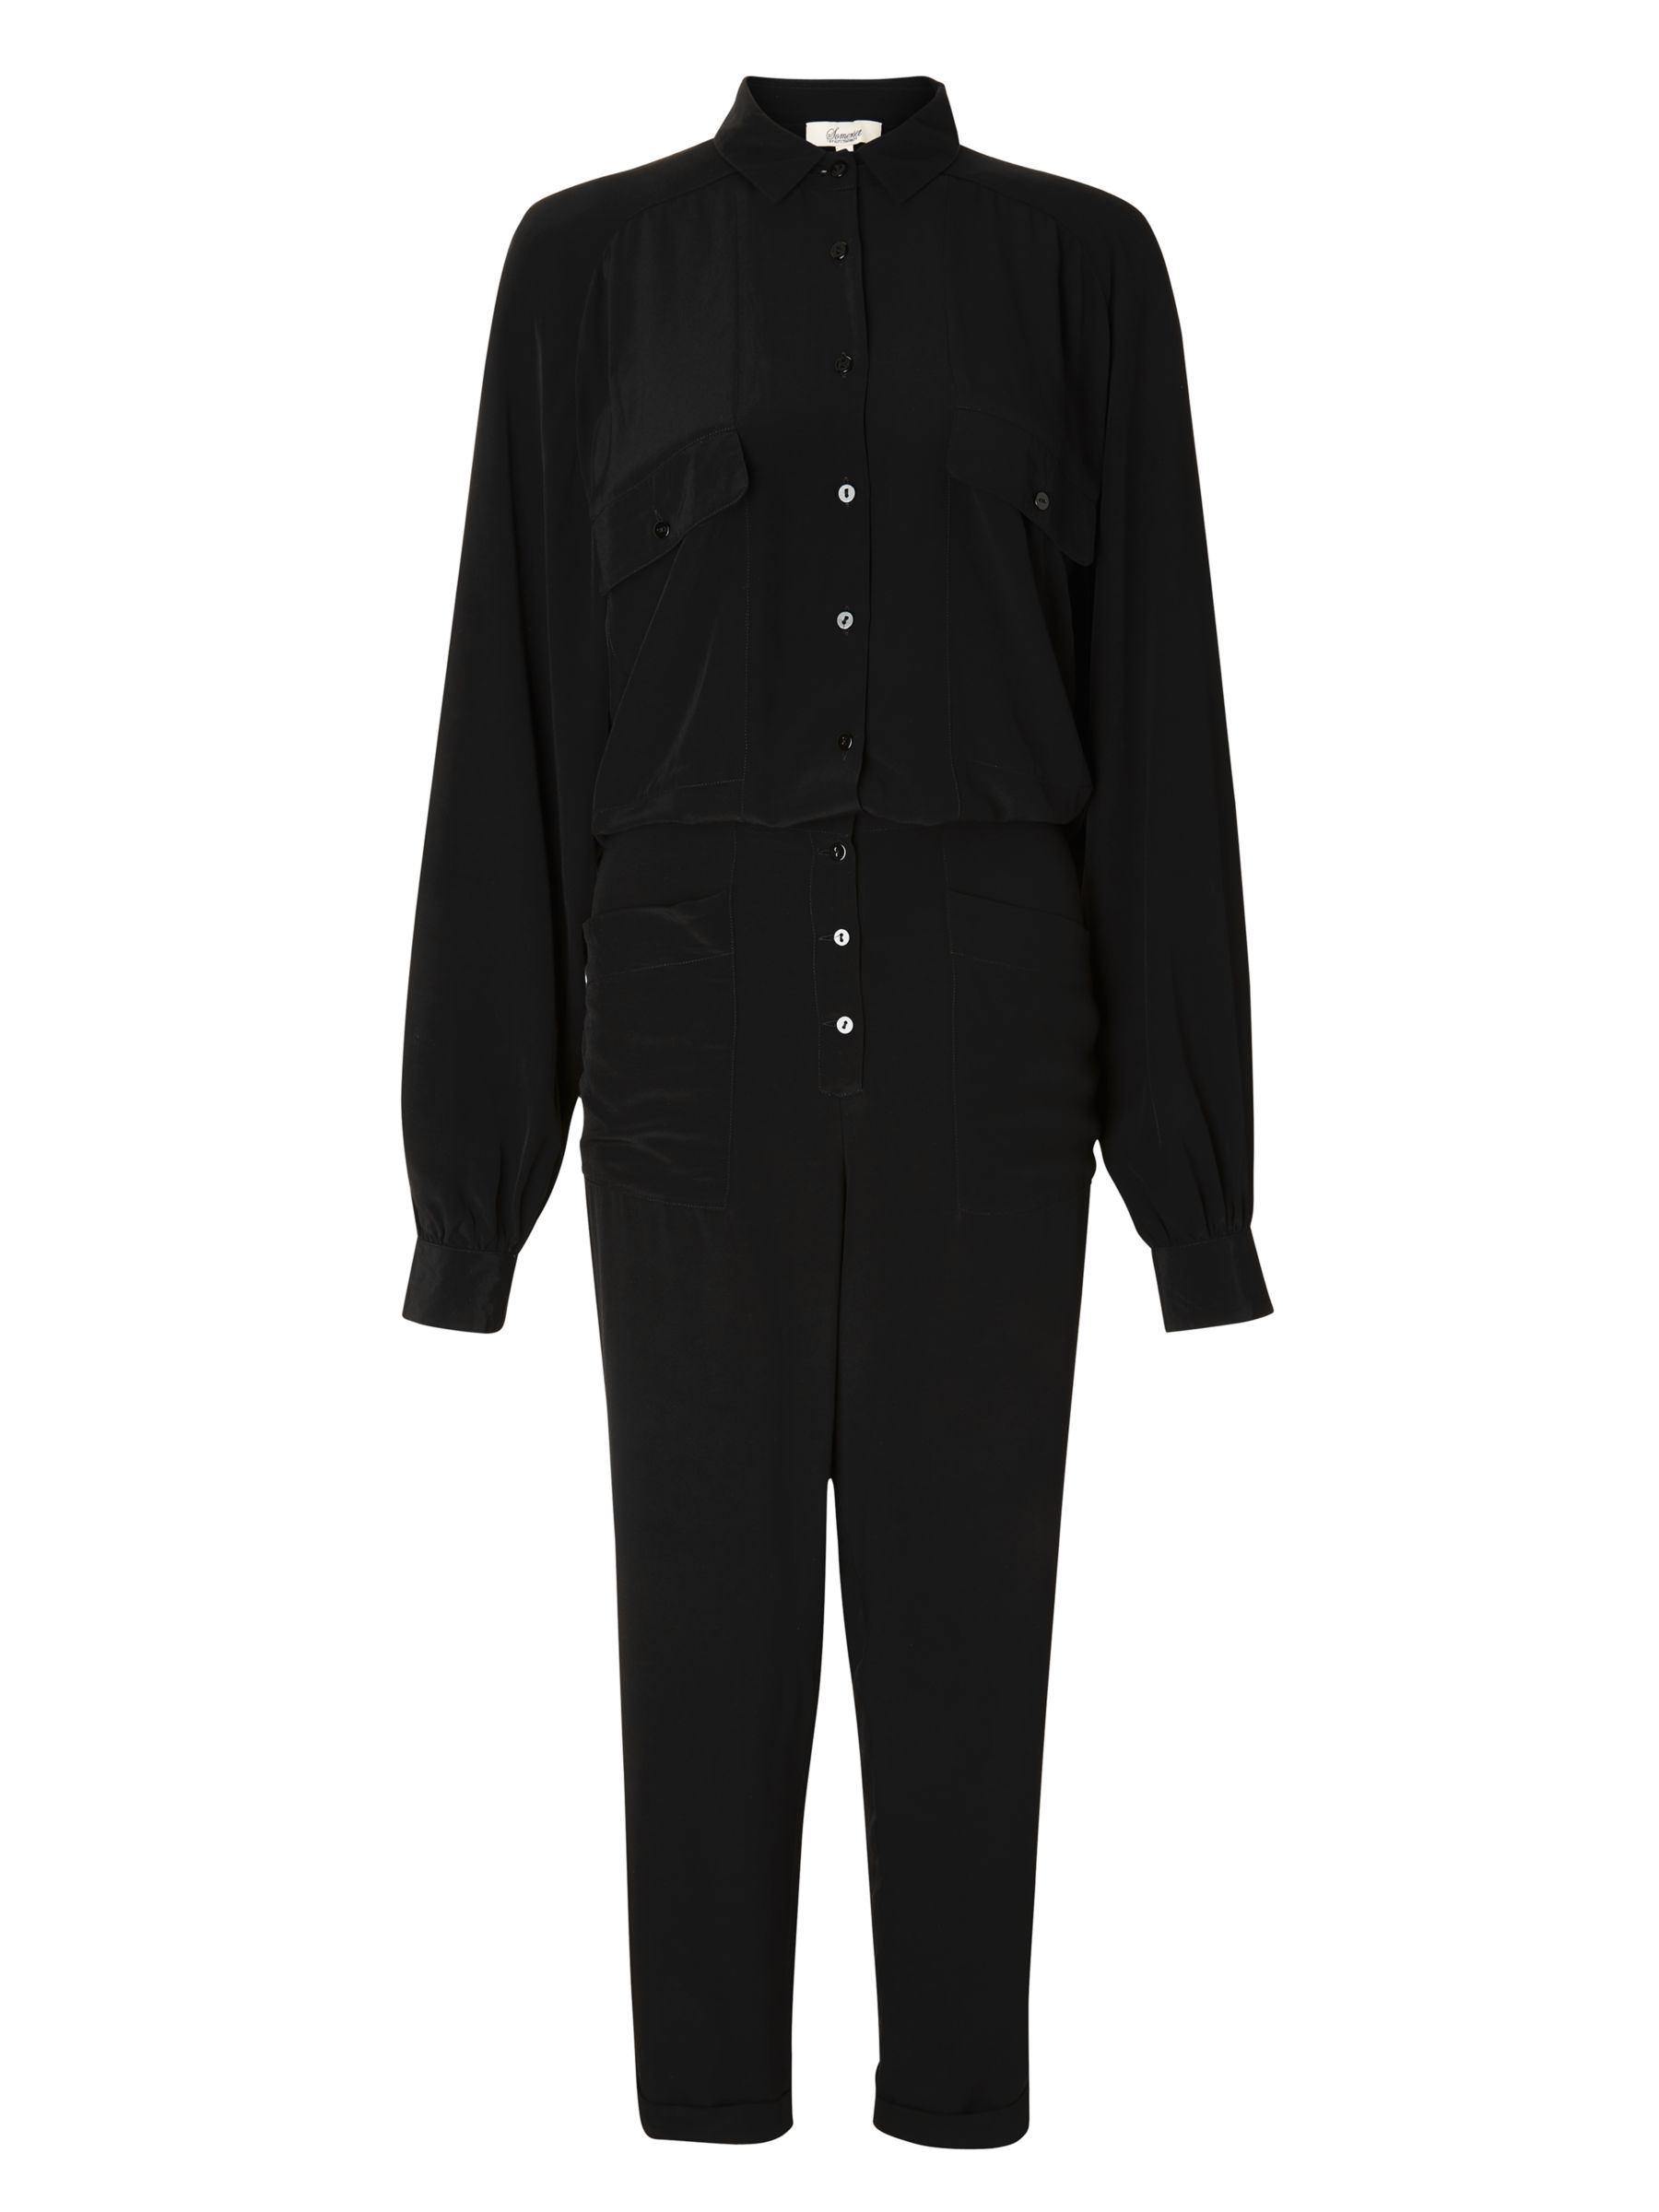 Somerset by Alice Temperley Shirt Jumpsuit, Black